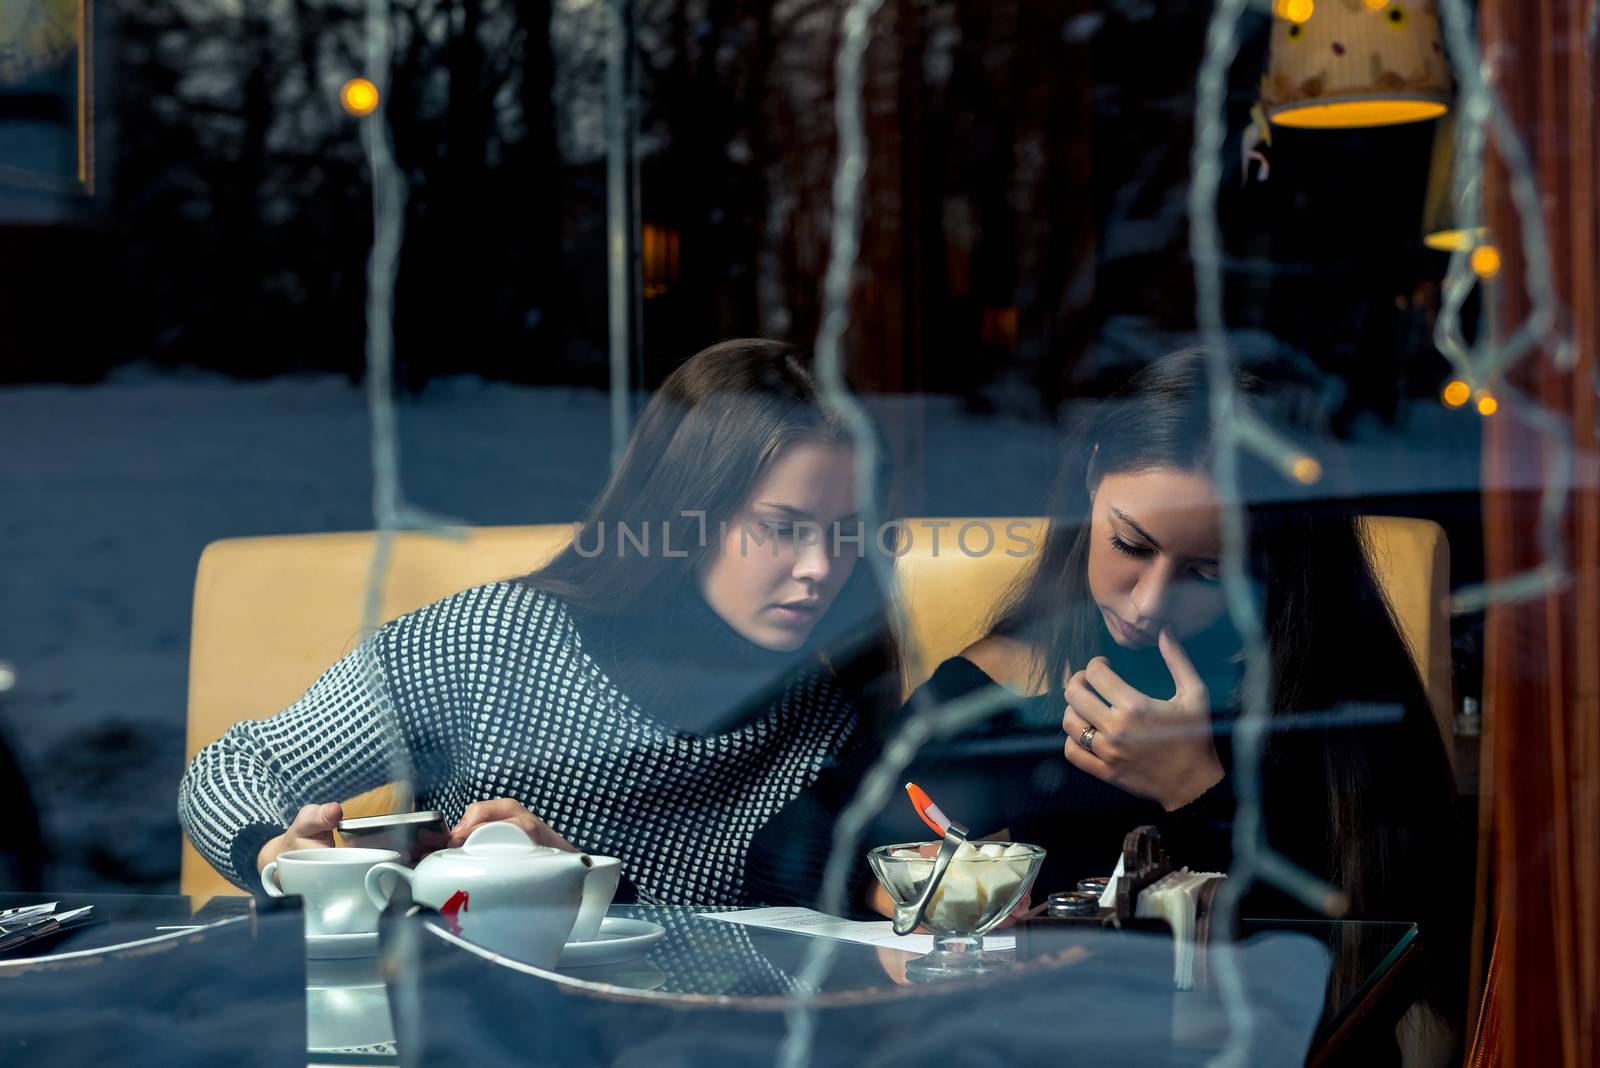 Communication of girlfriends, a meeting in a cafe, shooting behind a glass